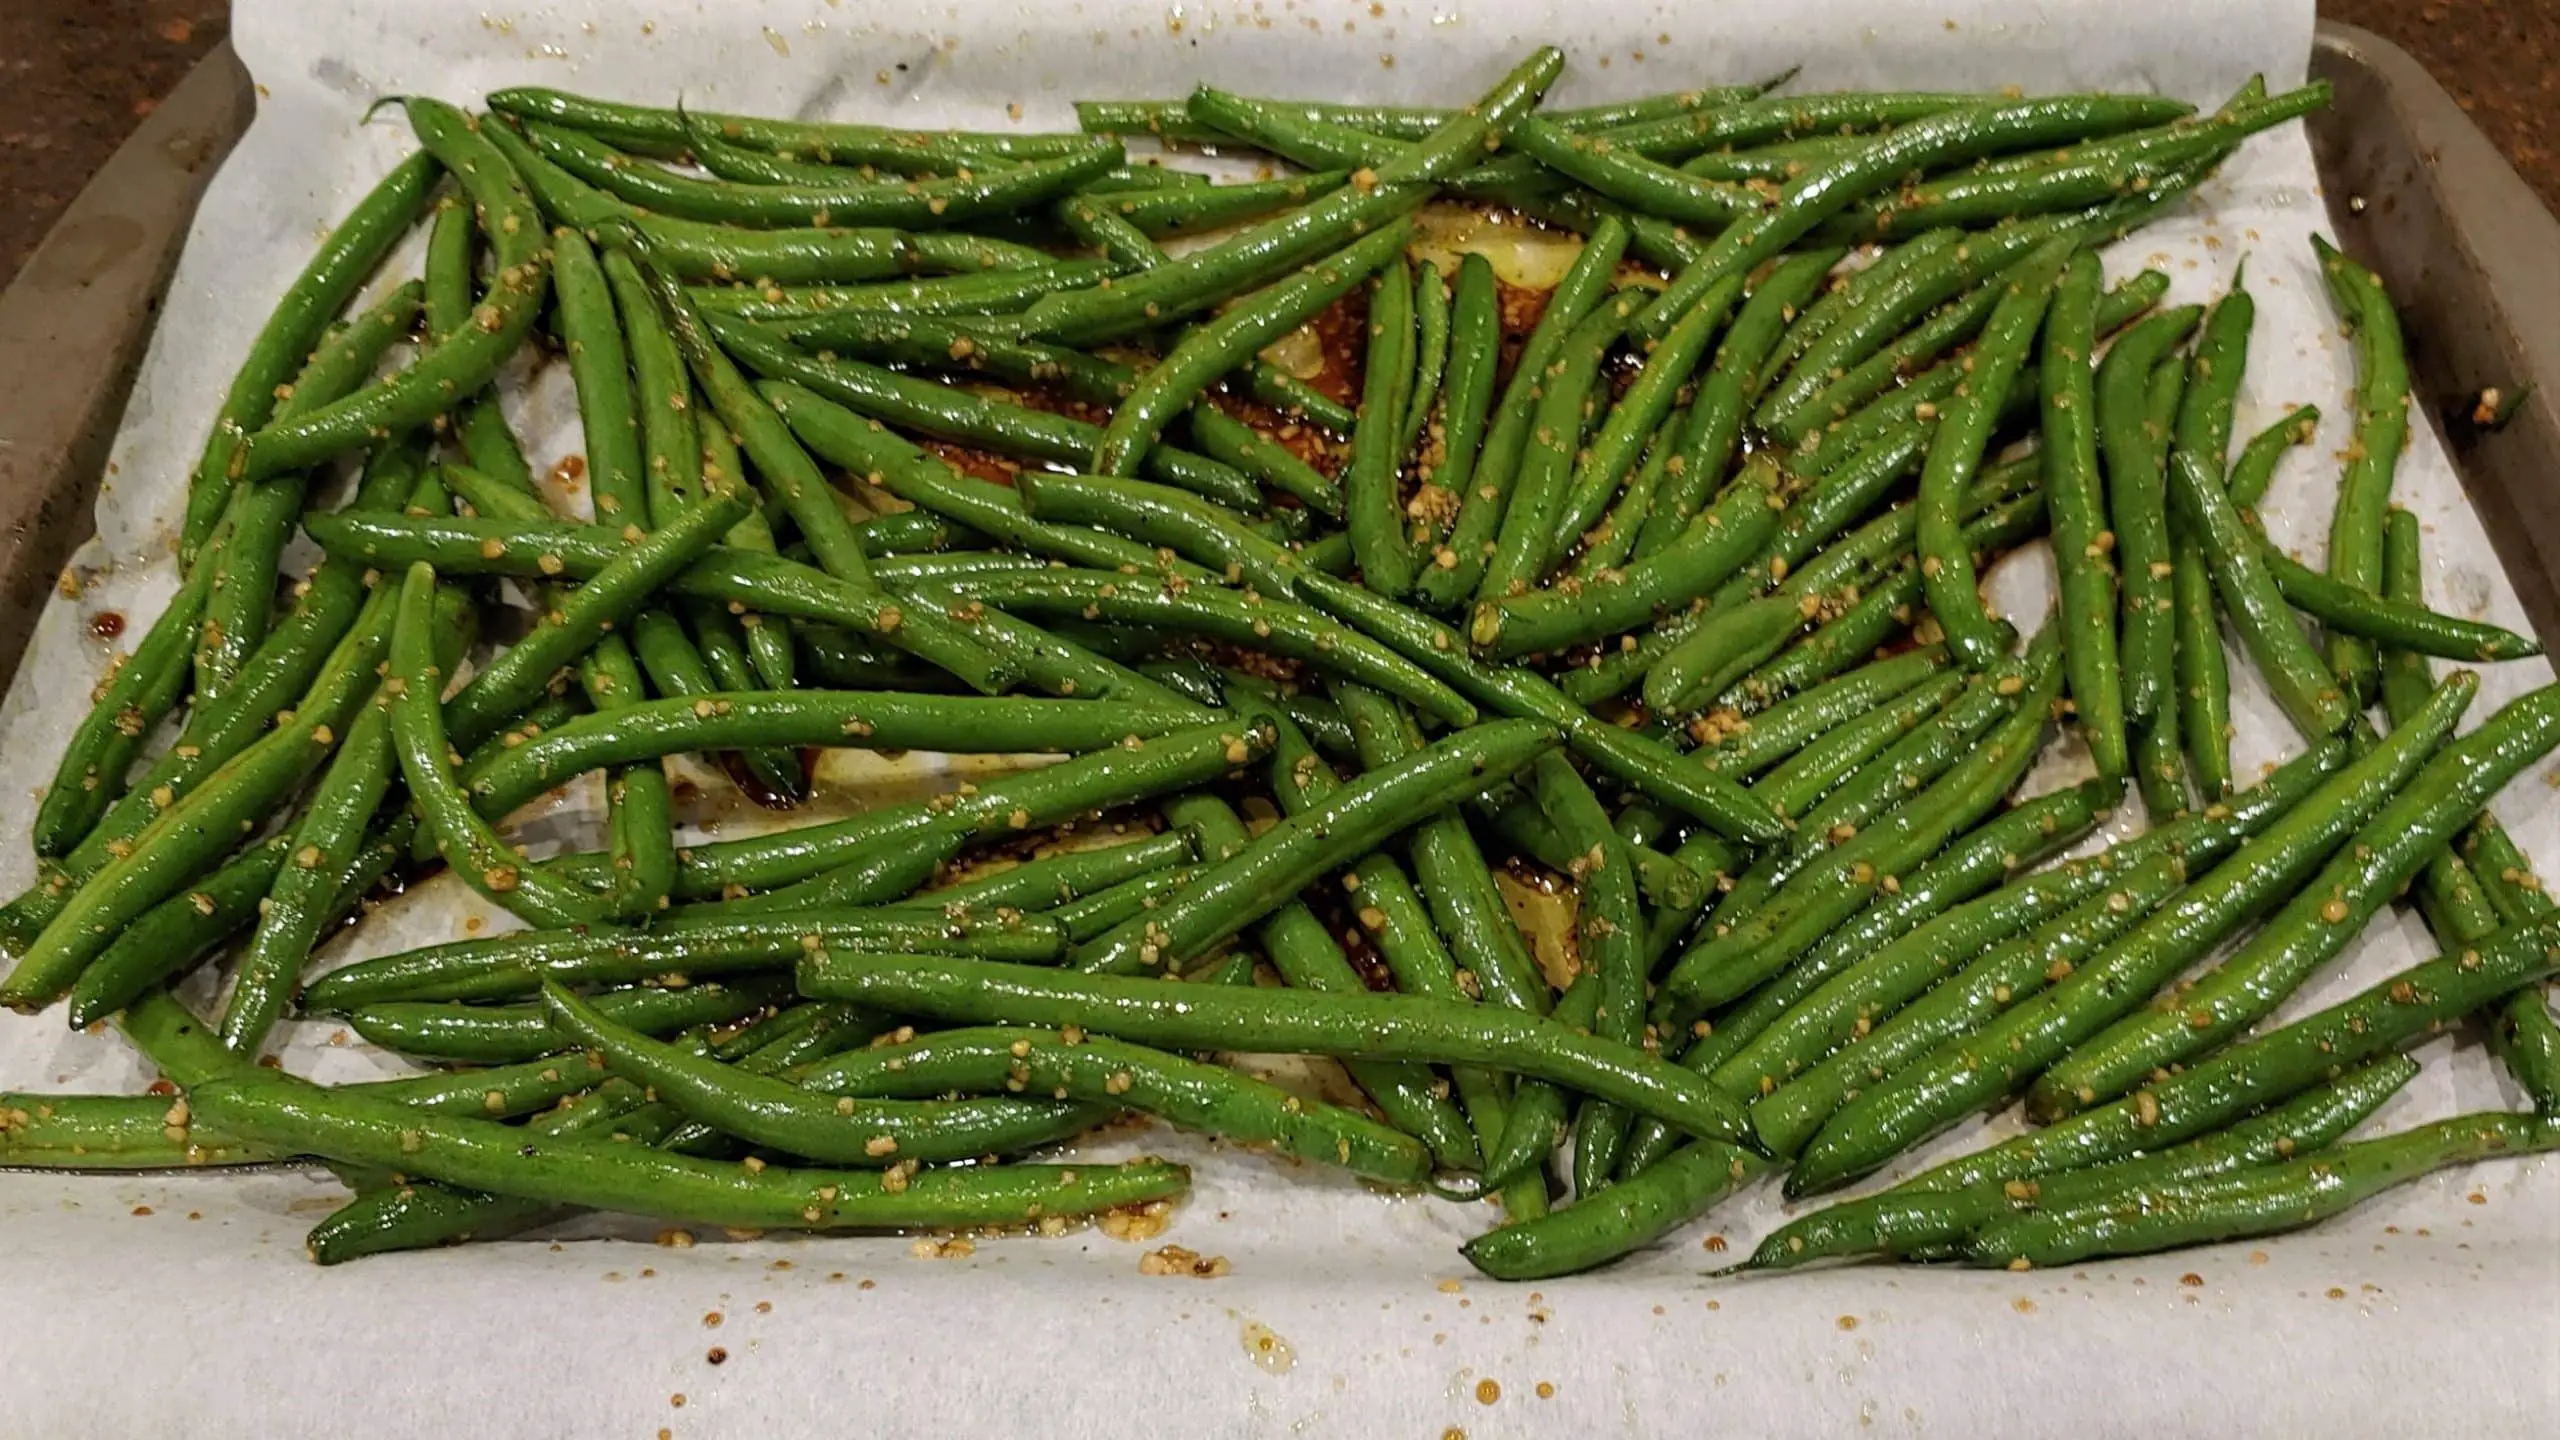 Balsamic Marinade smothered over Fresh Green Beans - Dining in with Danielle